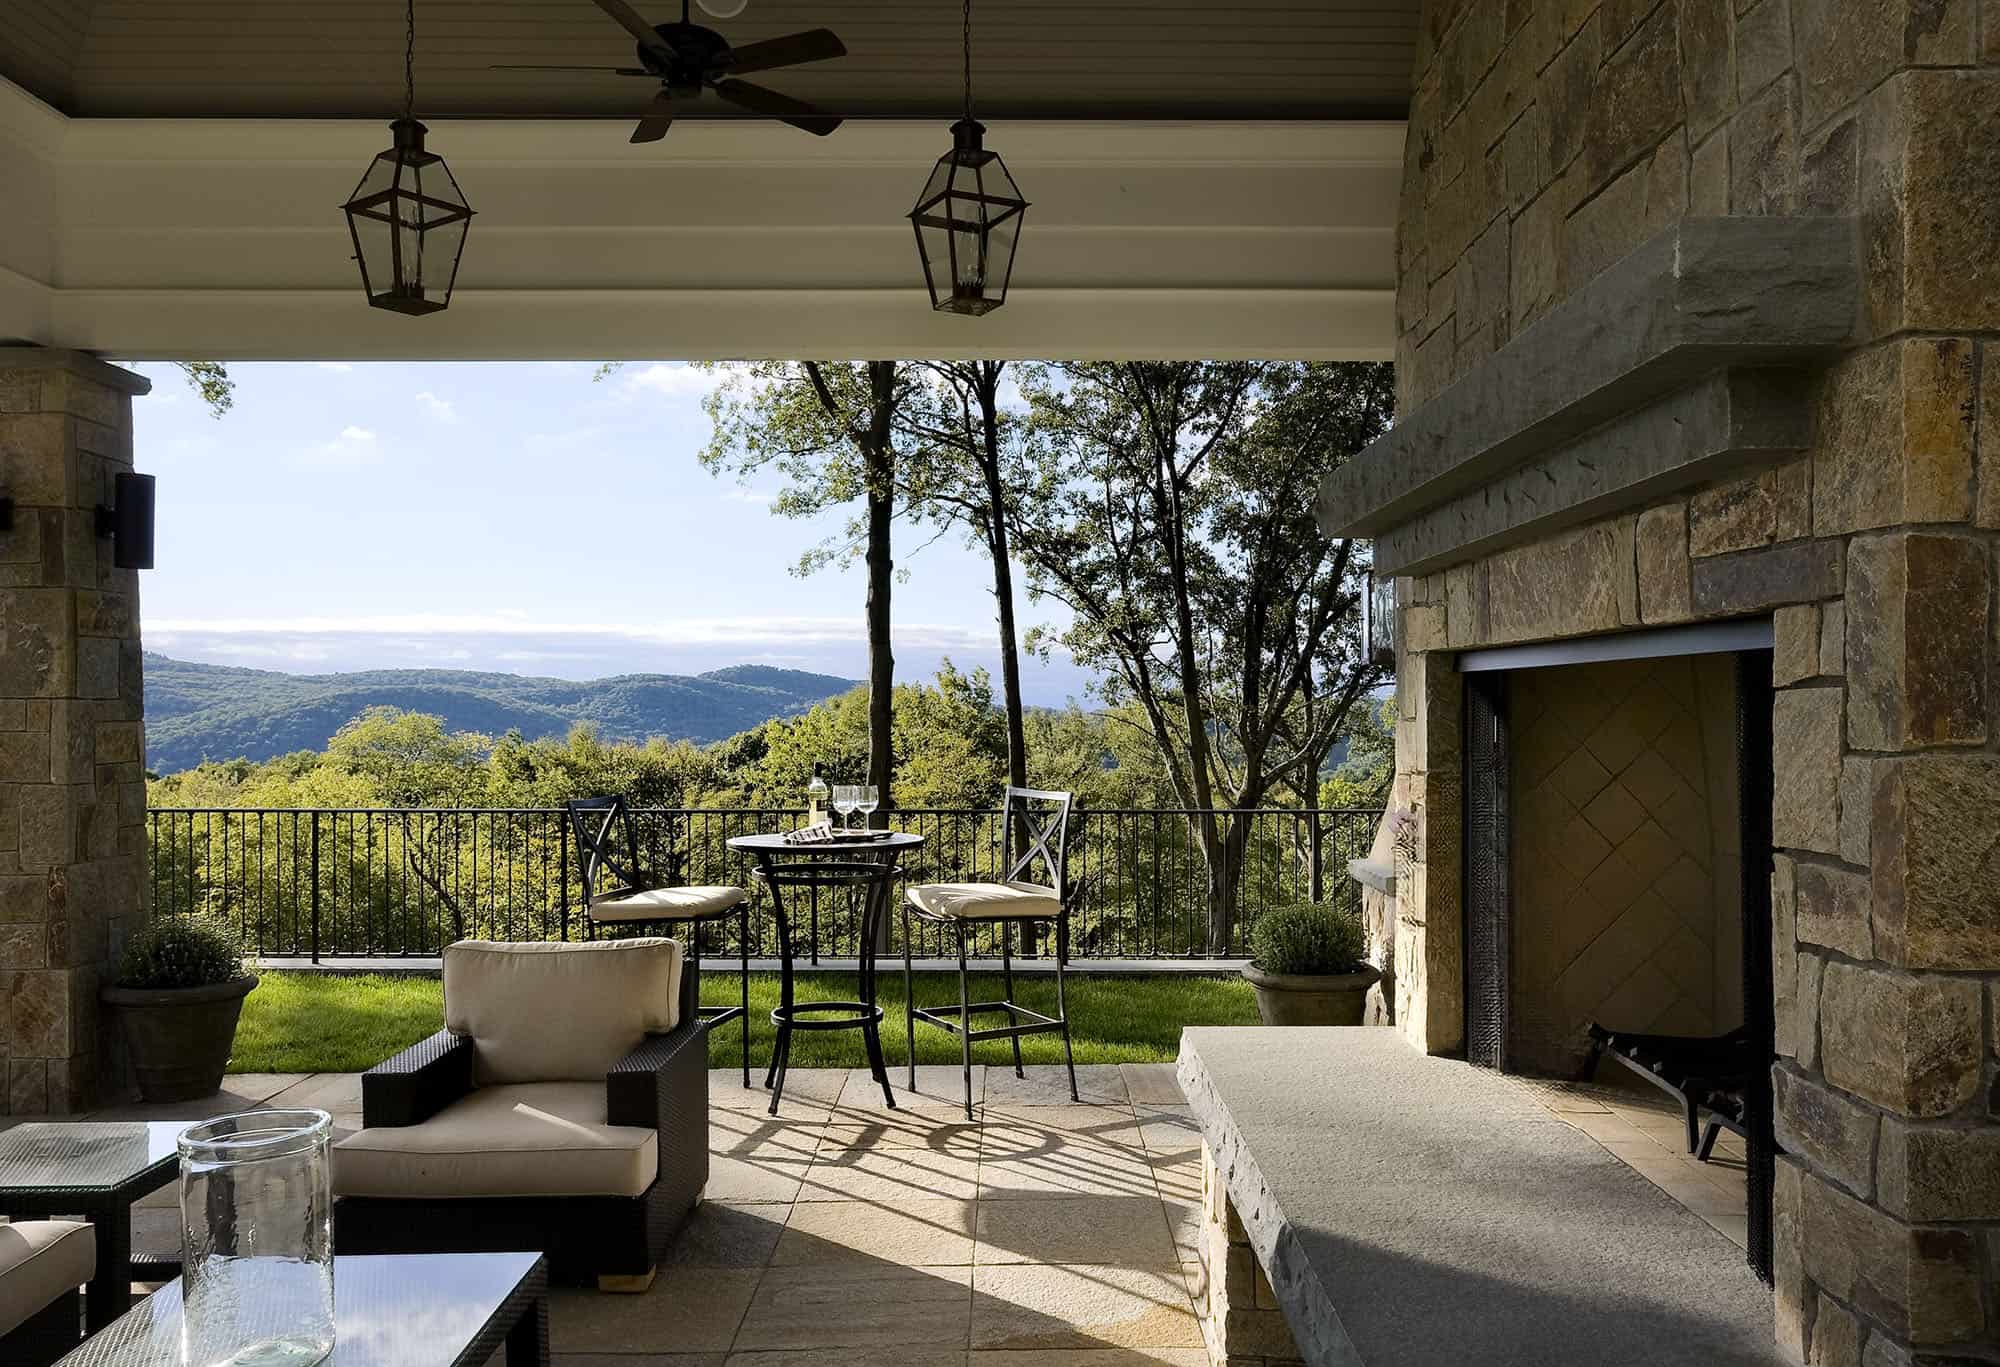 Outdoor Fireplace With A View